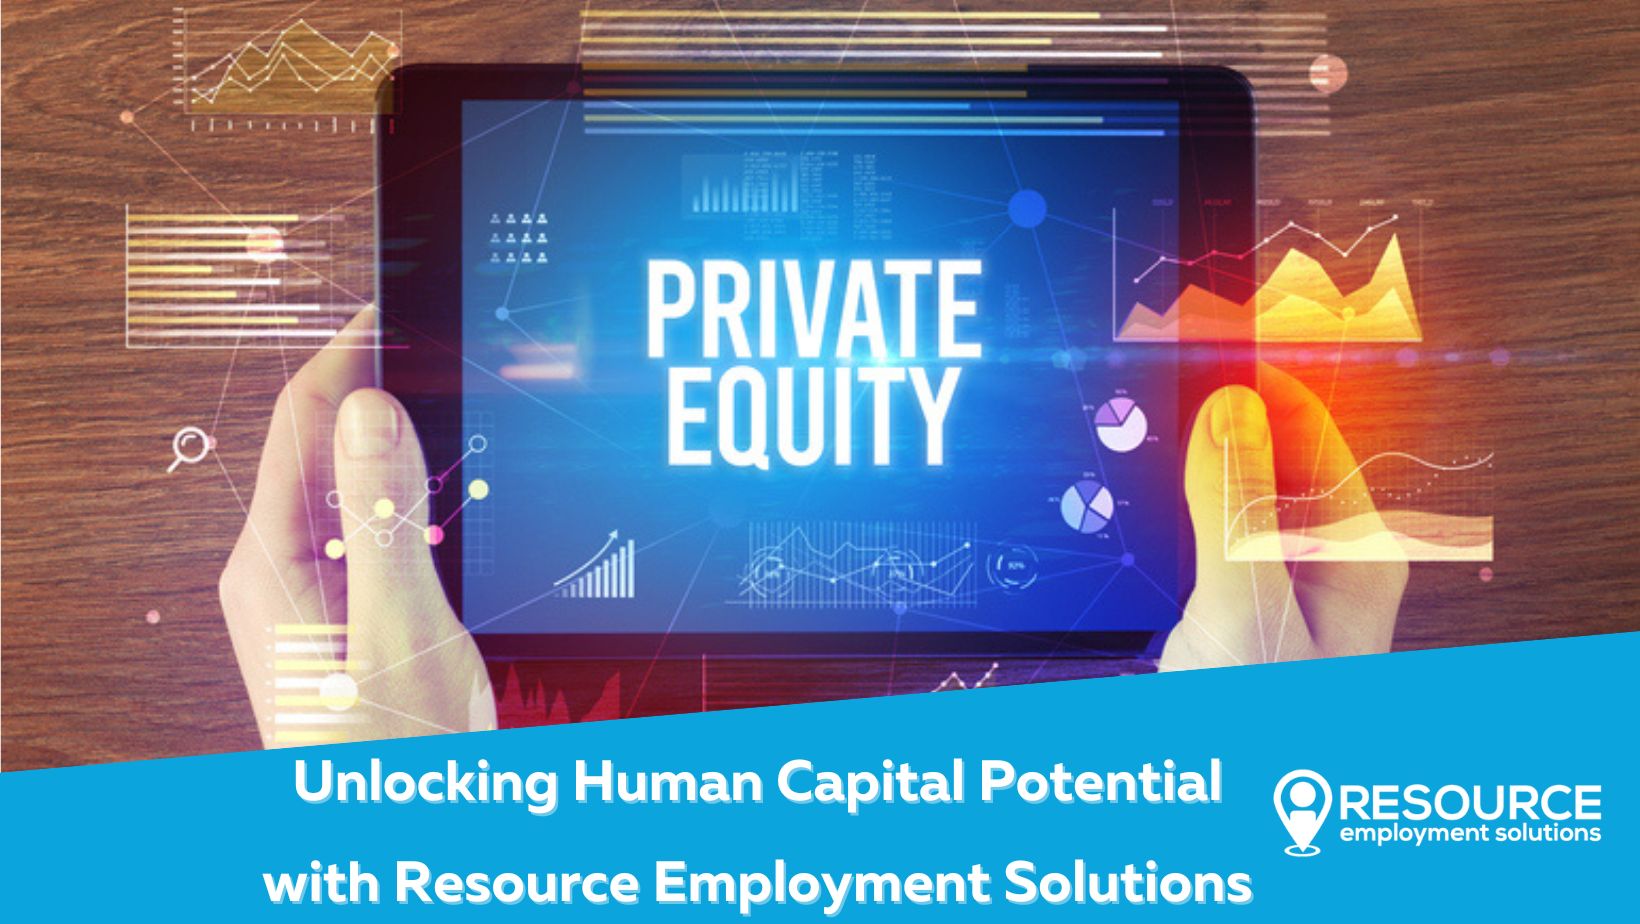  Unlocking Human Capital Potential with Resource Employment Solutions